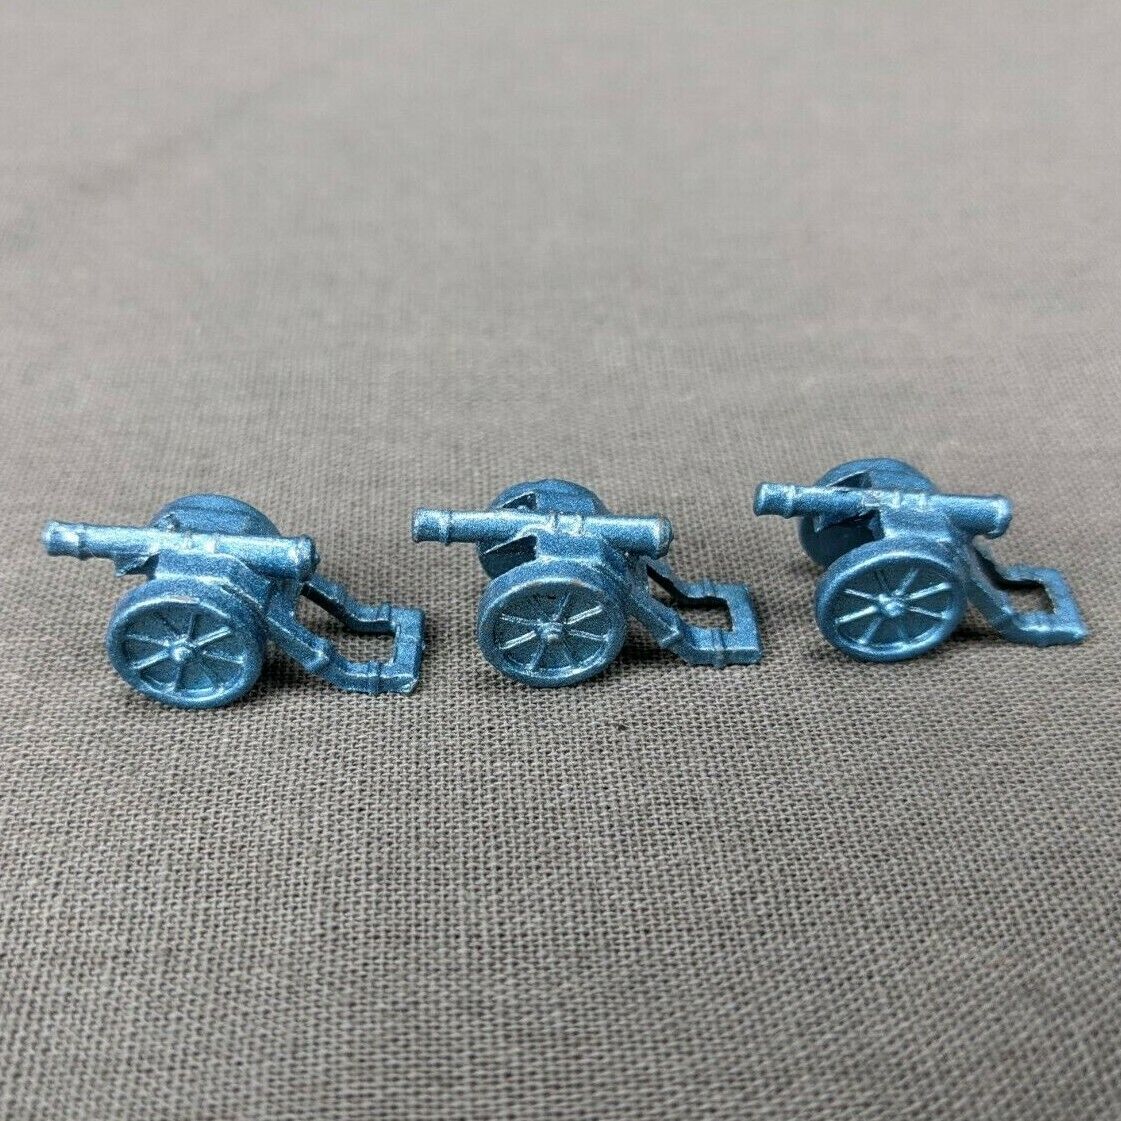 Risk 40th Anniversary Edition Board Game Metal Cannons 3 Pieces Blue Army